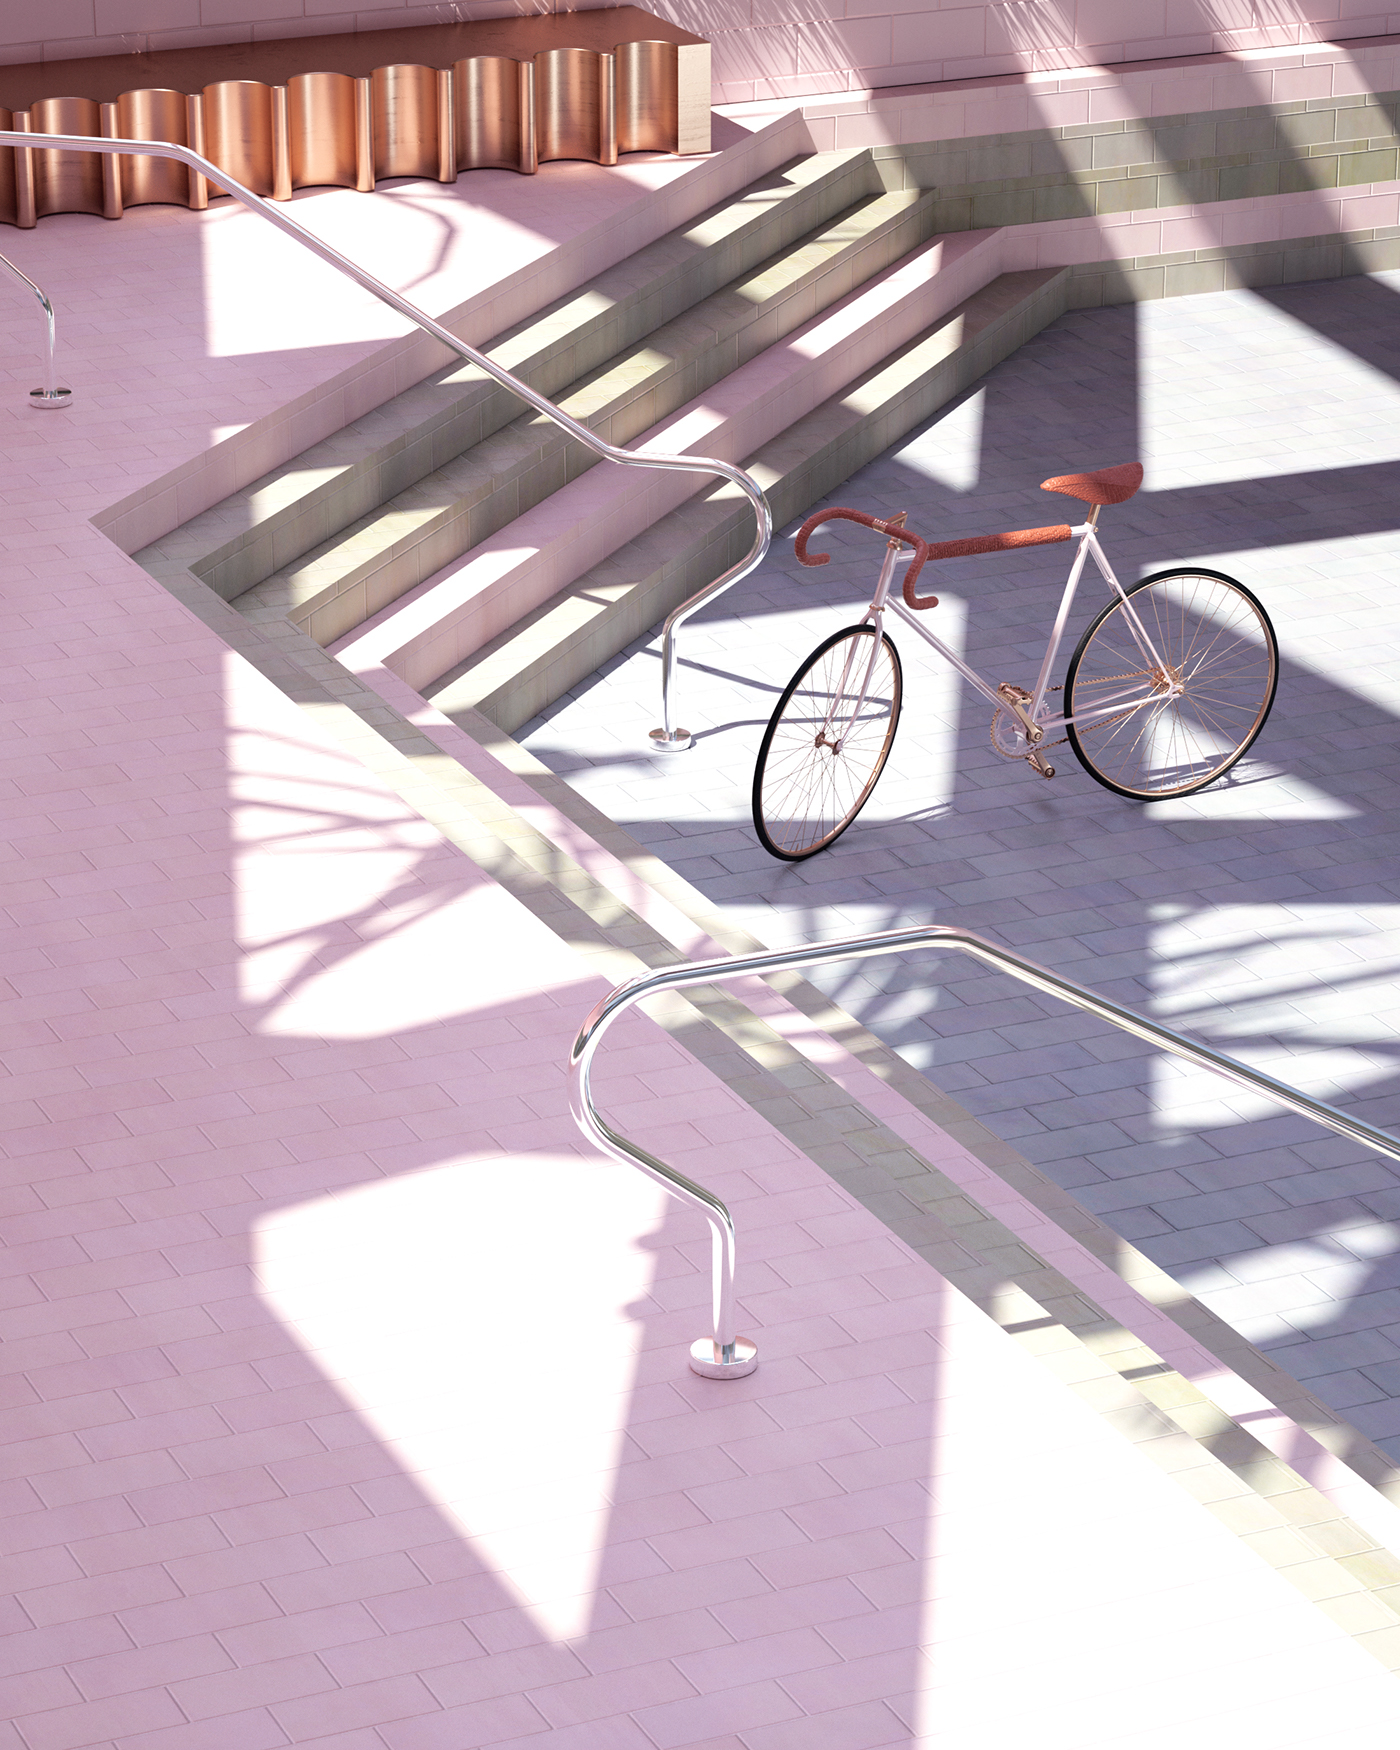 3D CGI Bike Bicycle octane otoy yasly pink copper